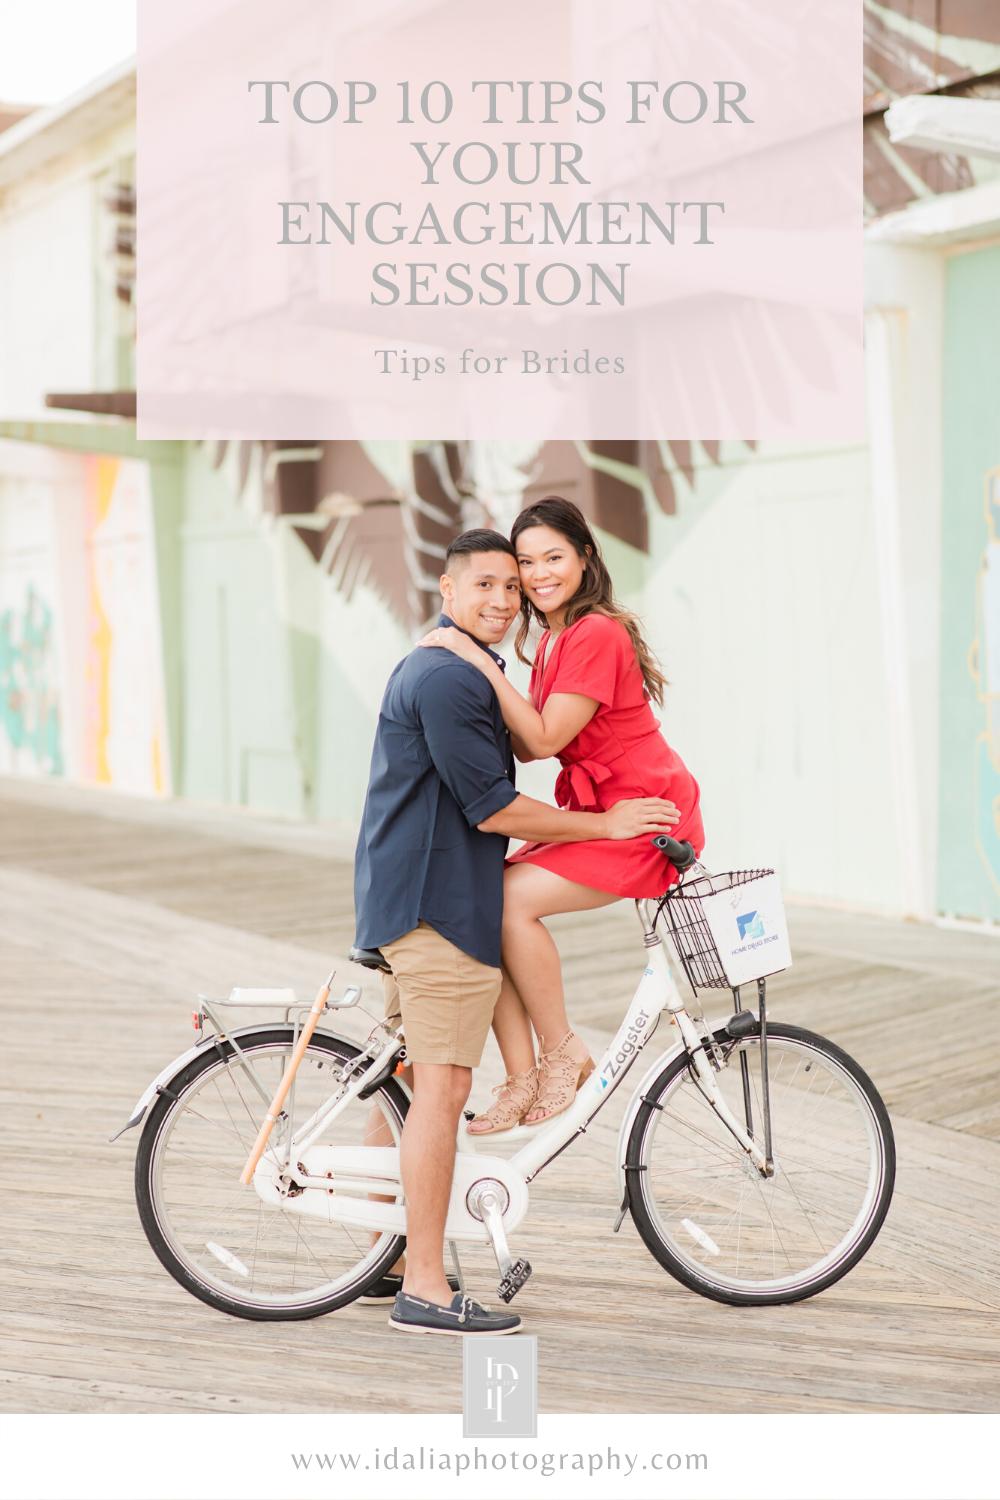 Top 10 Tips for Your Engagement Photos